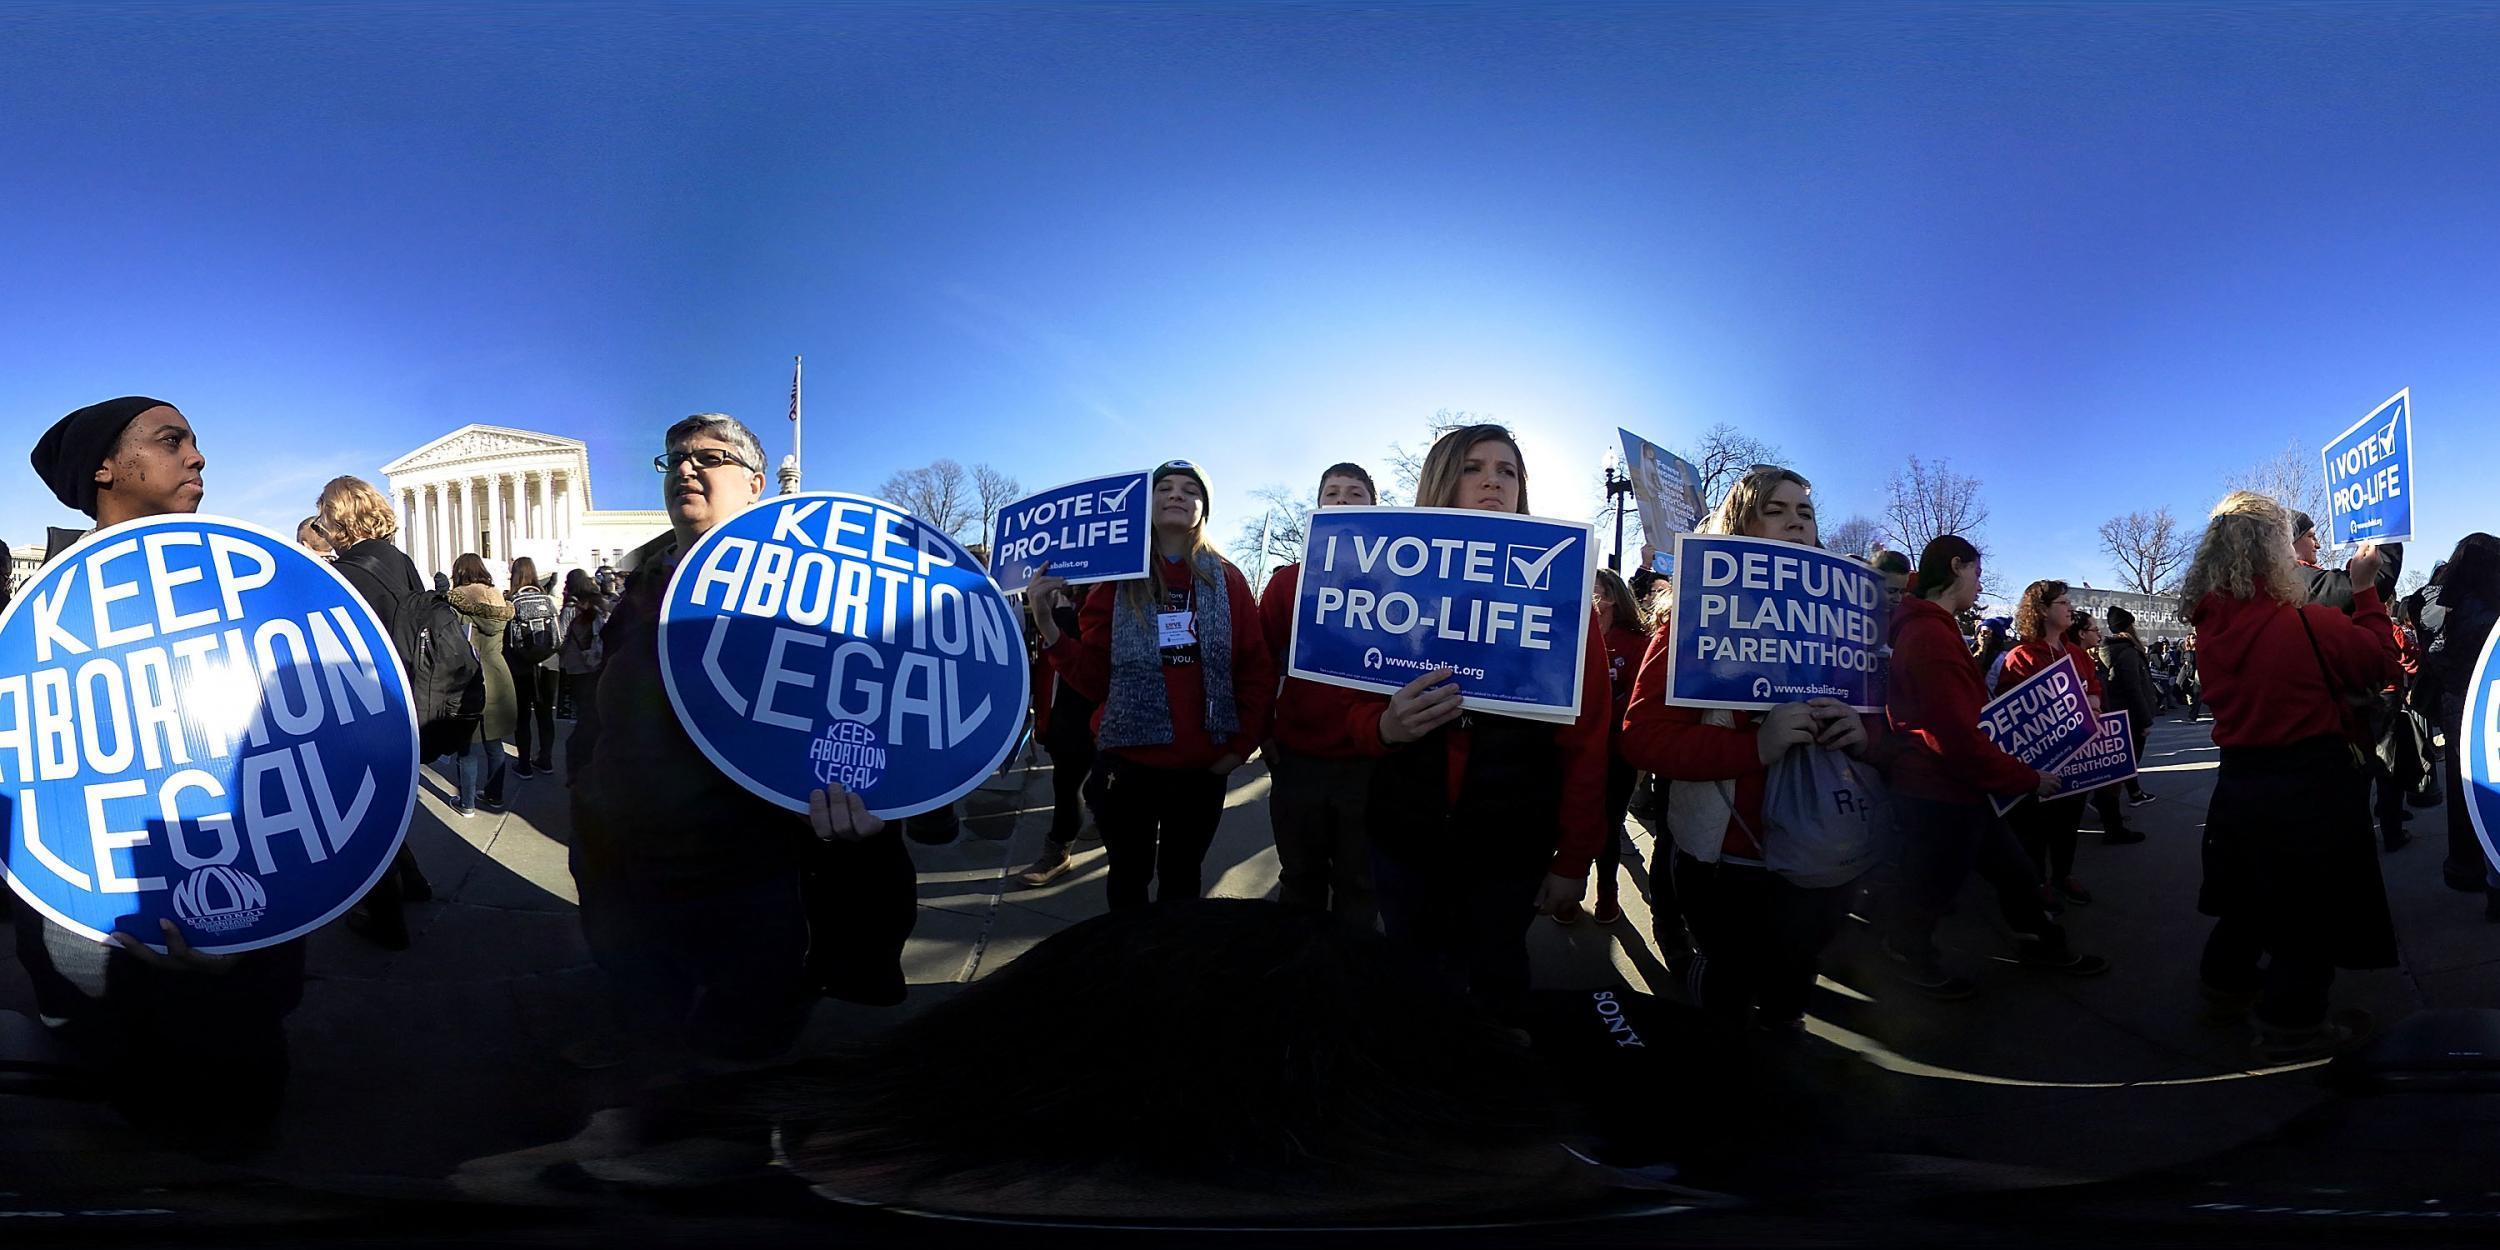 Anti-abortion activists hold signs as they counter-protest in front of the U.S. Supreme Court during the 2018 March for Life January 19 2018 in Washington DC